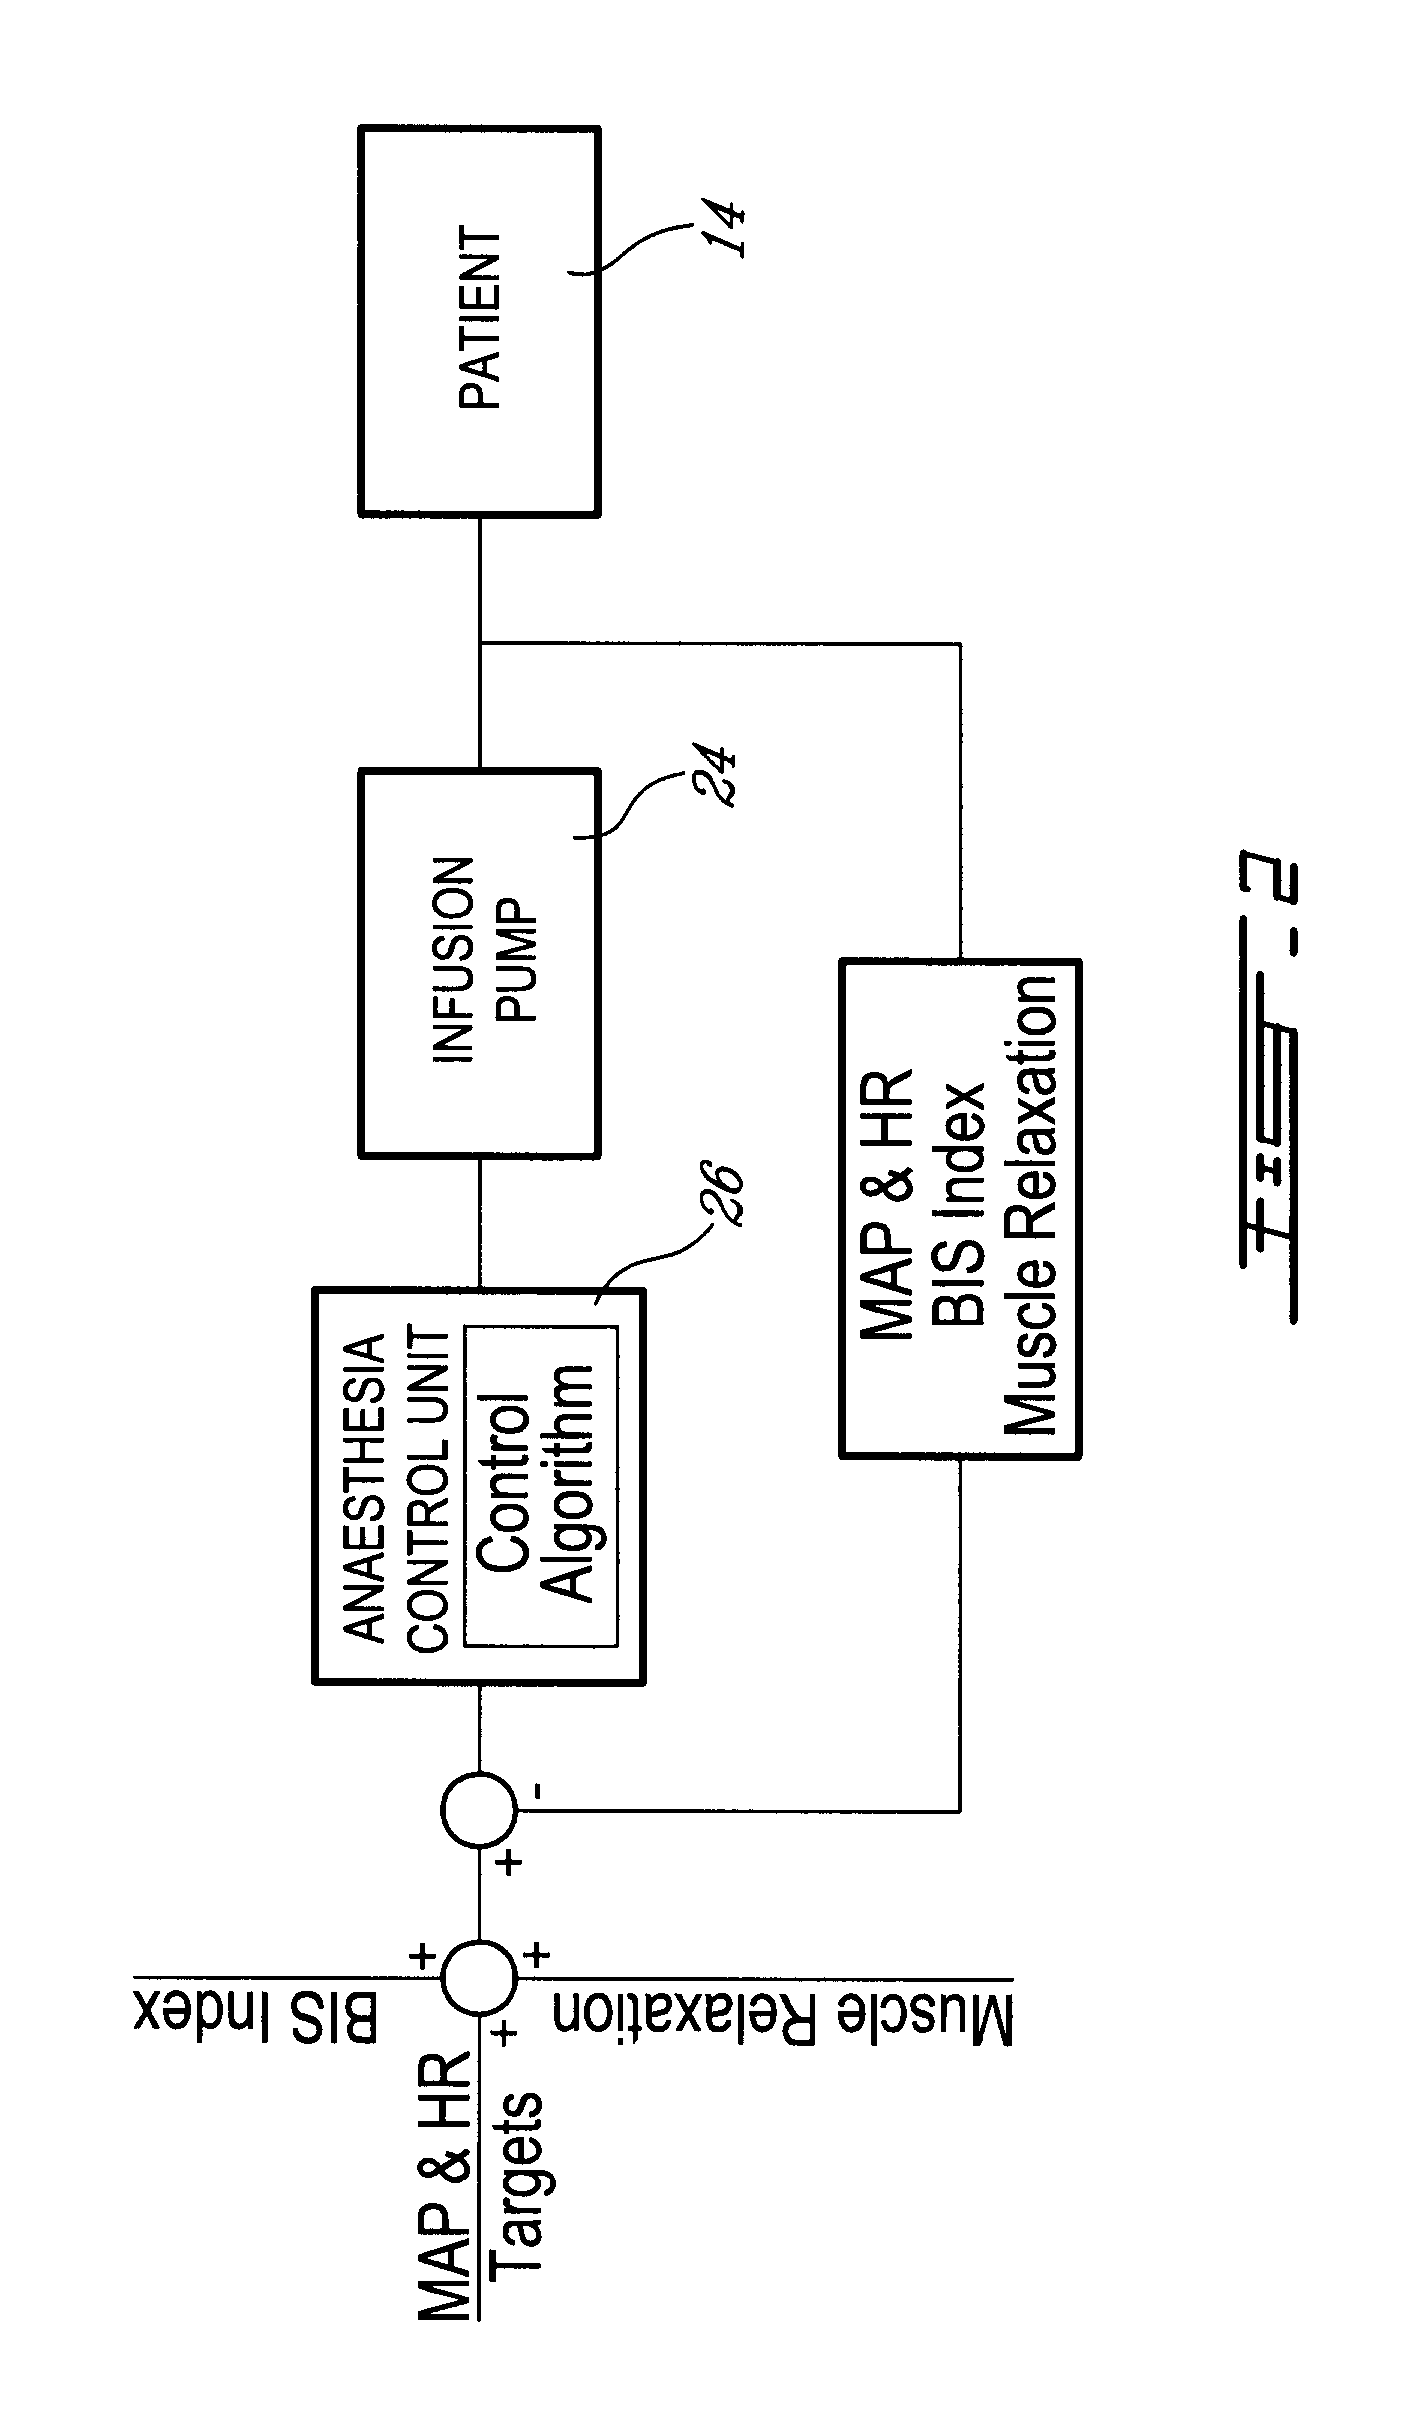 Method and system for administering an anaesthetic